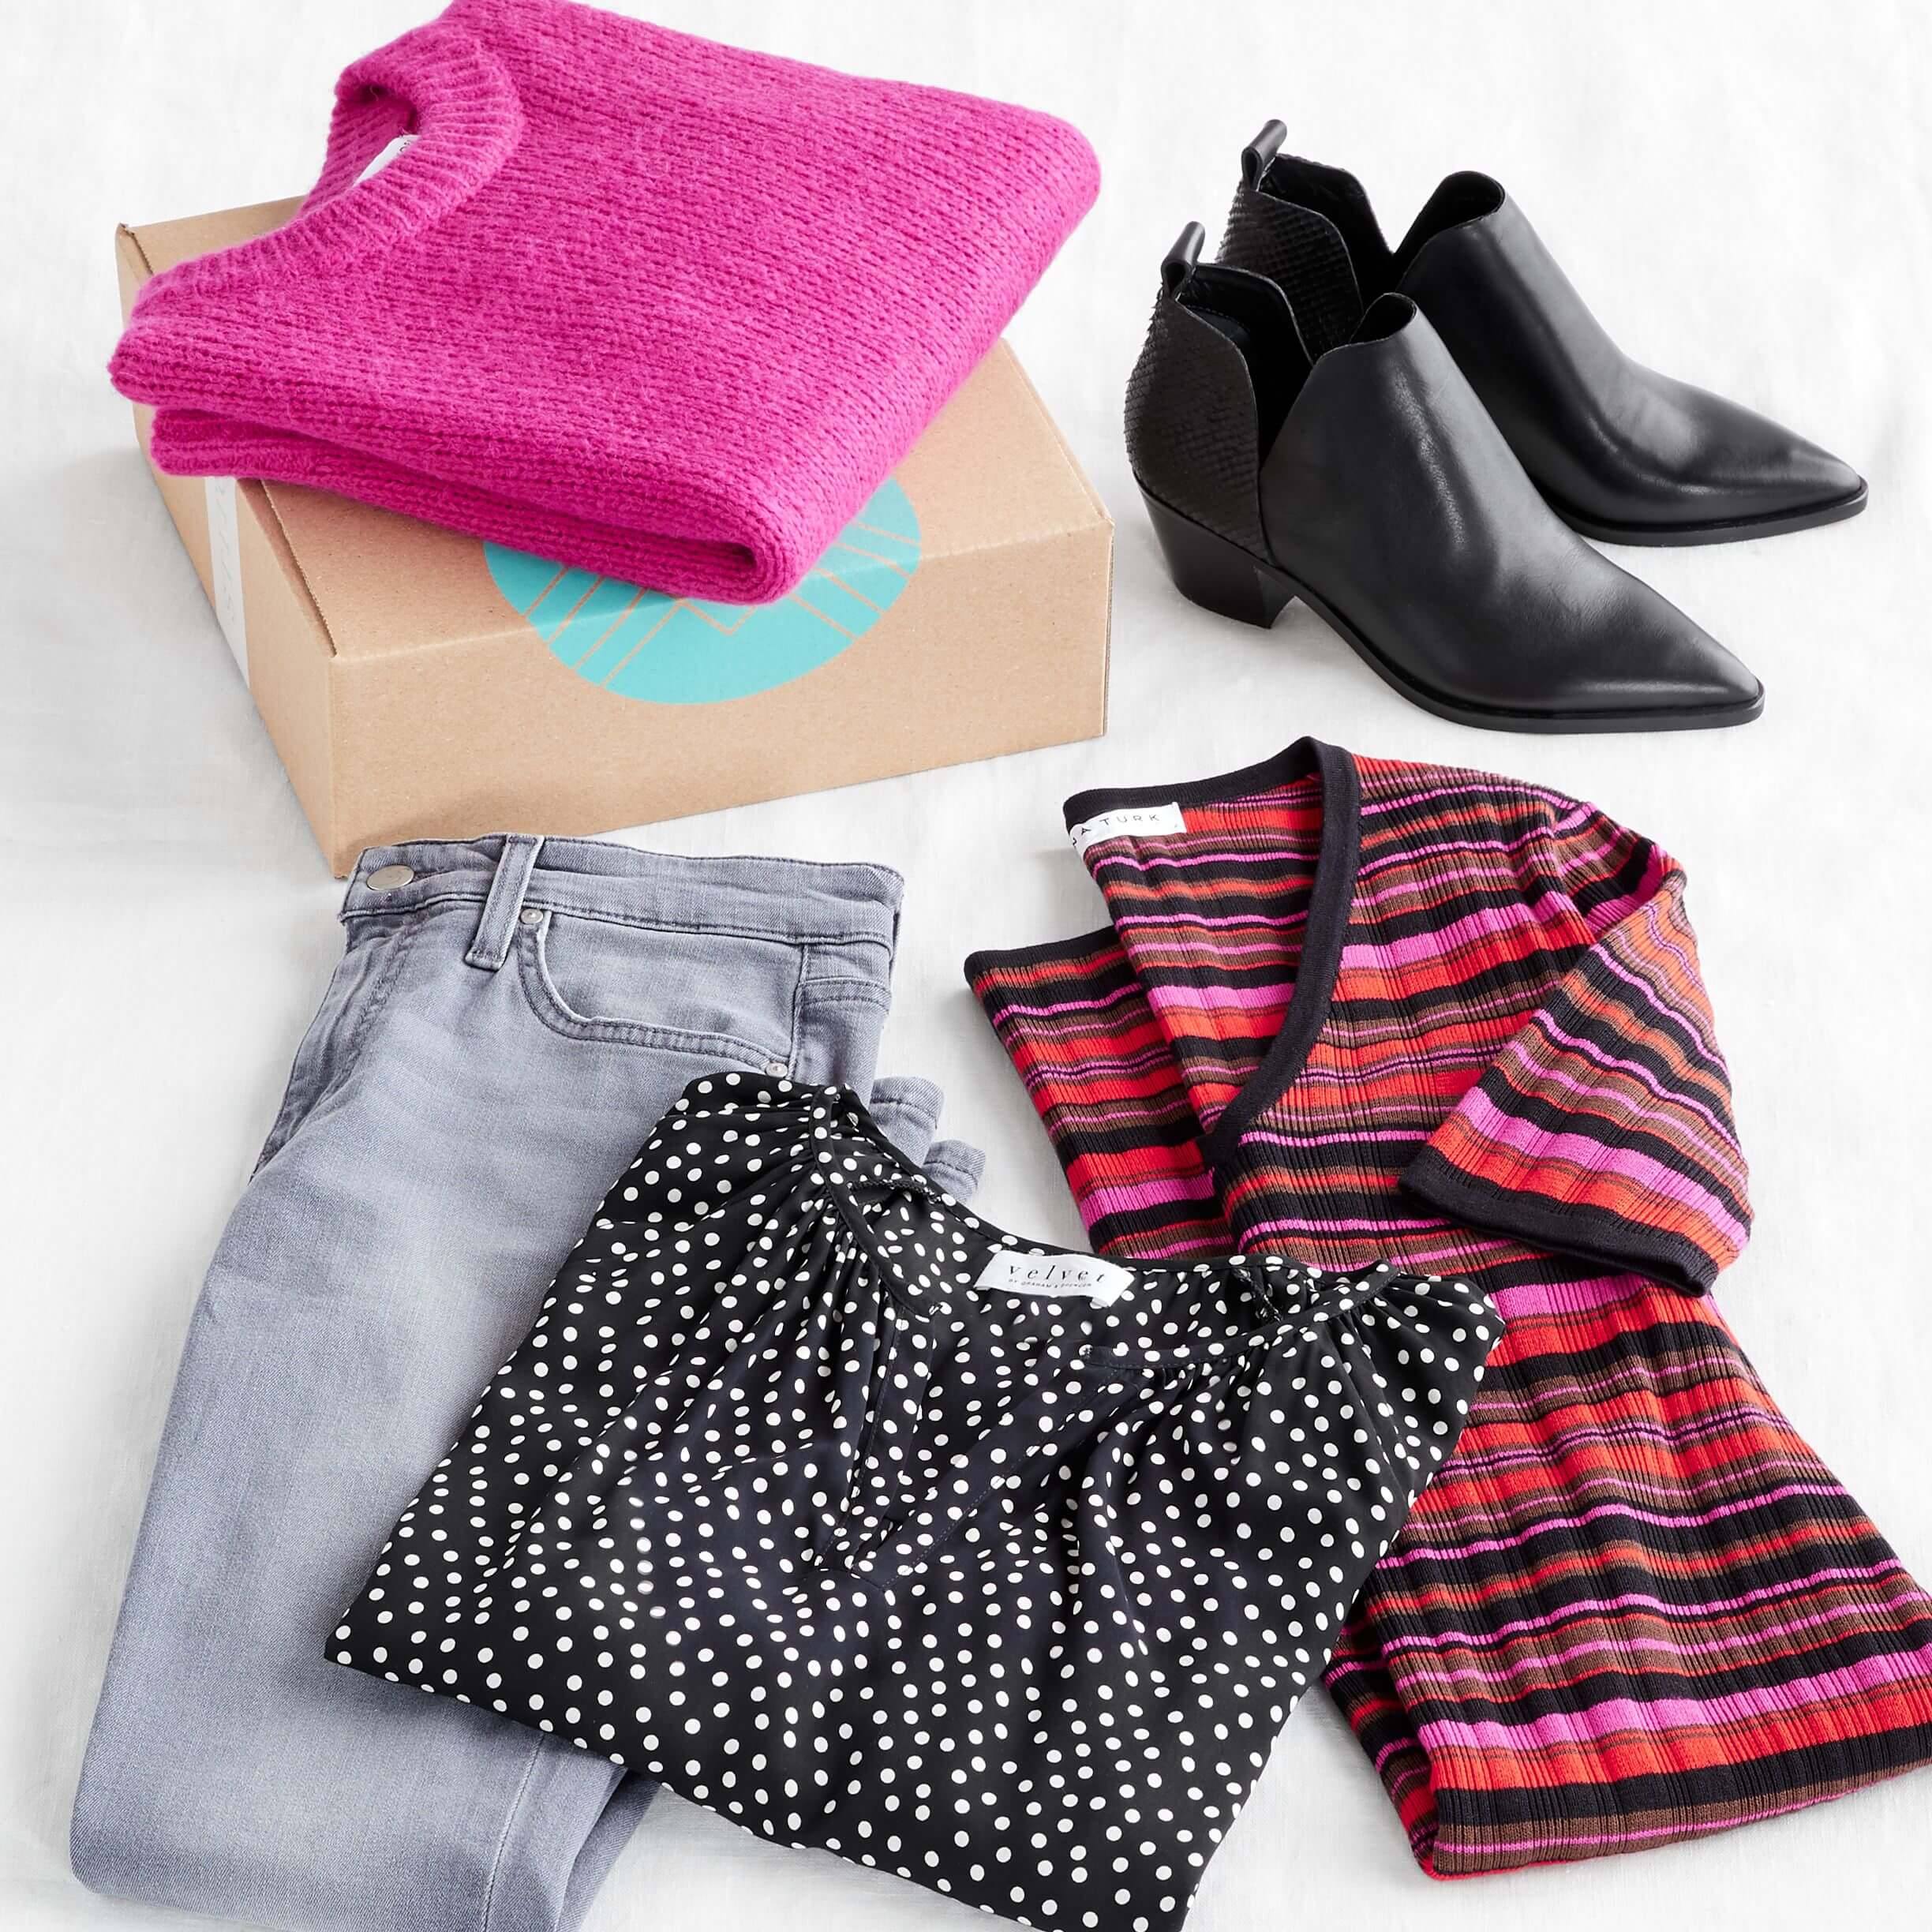 Stitch Fix Women’s outfit laydown featuring a bright pink crew neck sweater on a Stitch Fix delivery box, next to black booties, pink striped sweater dress, black polka dot top and grey jeans. 